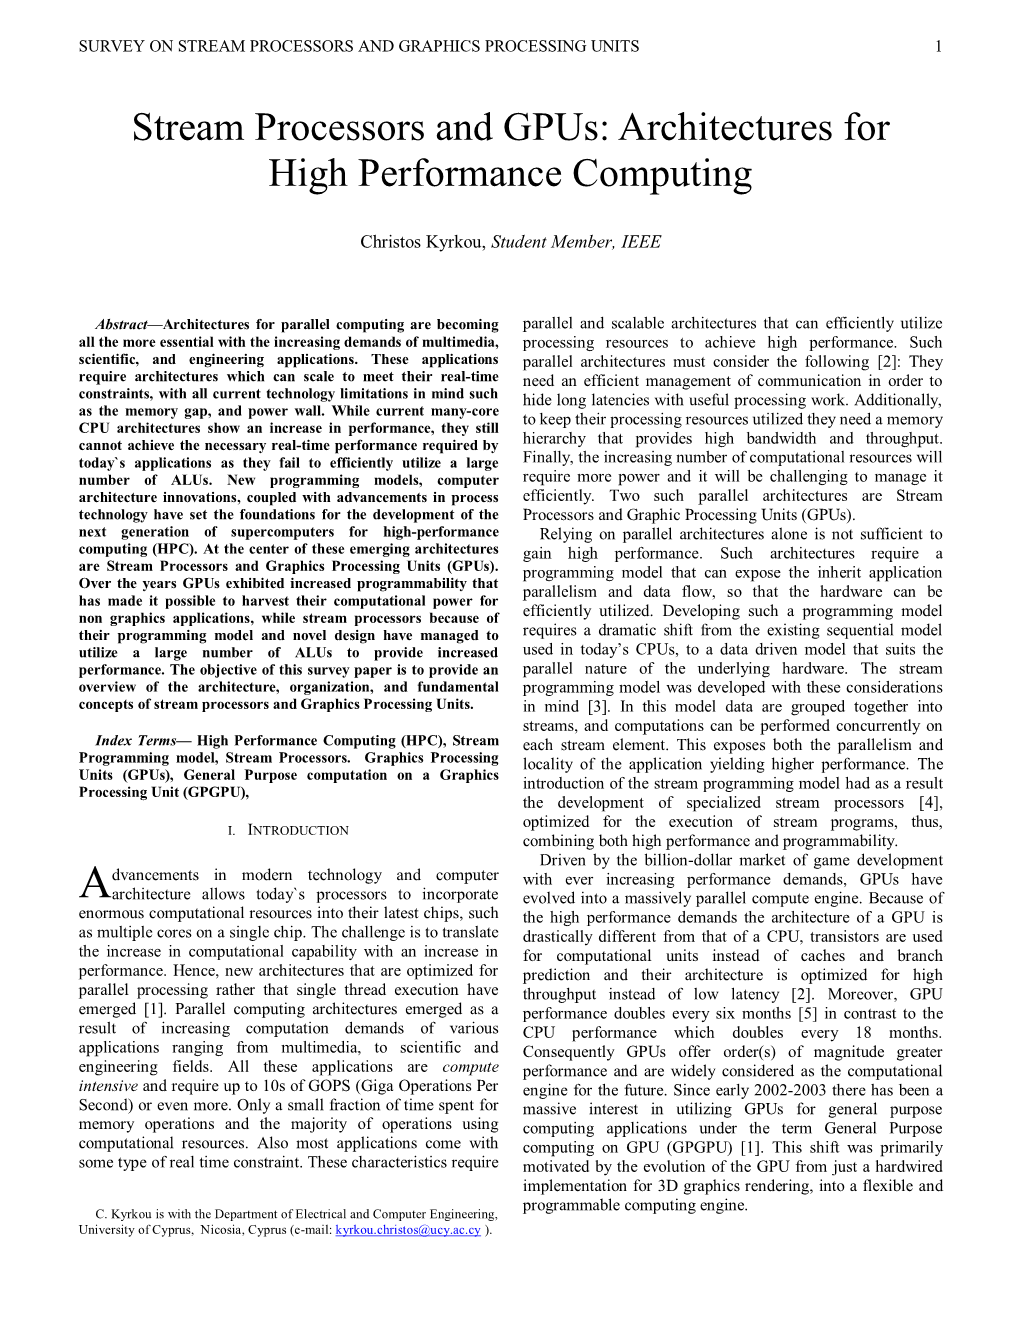 Stream Processors and Gpus: Architectures for High Performance Computing